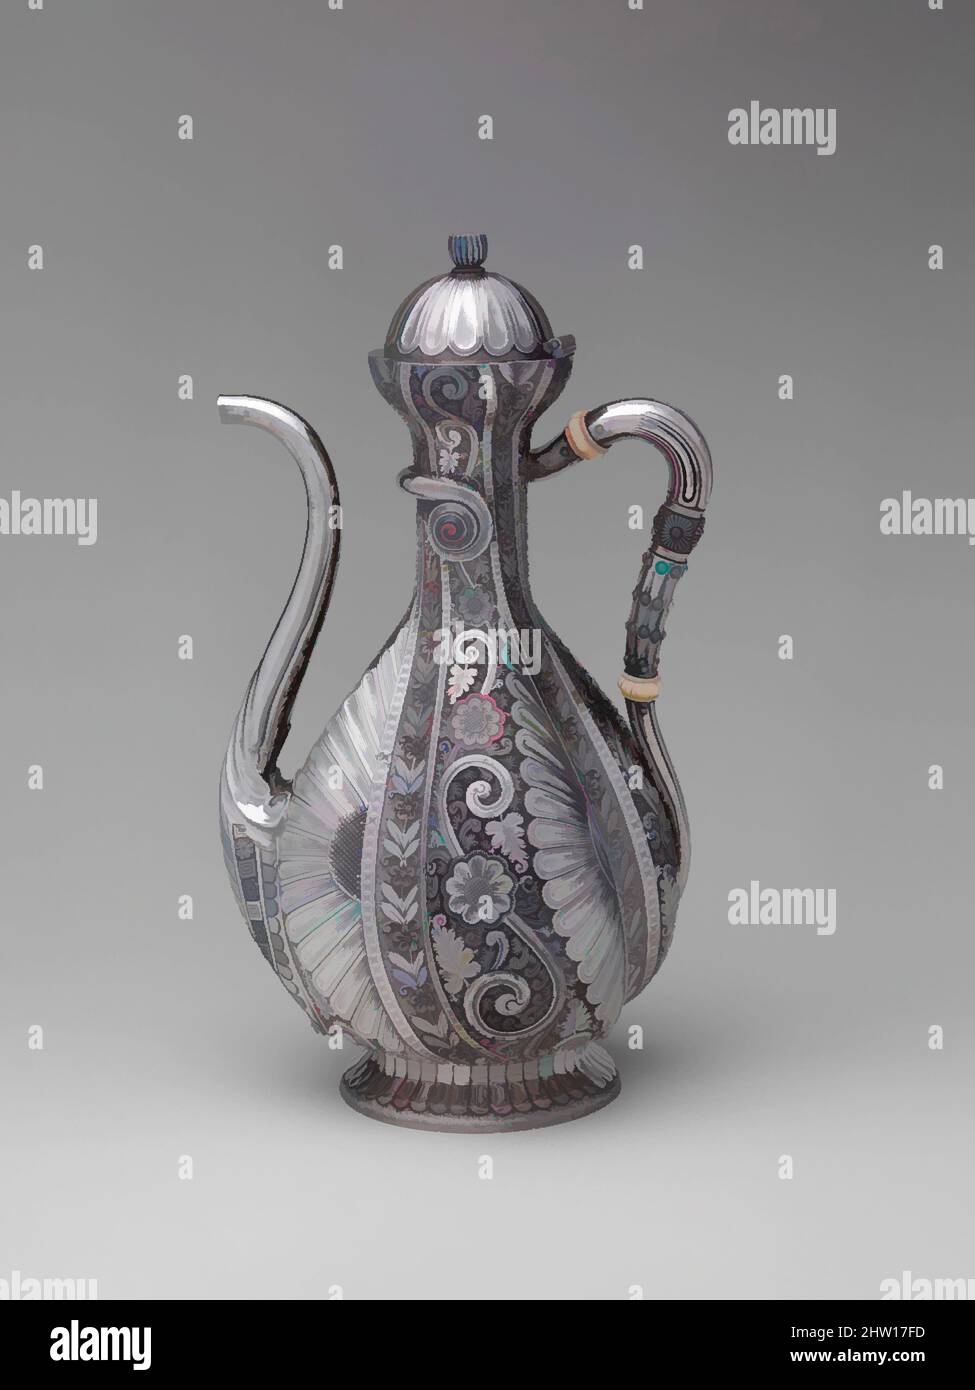 Art inspired by Coffeepot, 1881, Made in Providence, Rhode Island, United States, American, Silver, ivory, 10 5/8 × 6 × 4 7/8 in., 30oz. 9dwt. (27 × 15.2 × 12.4 cm, 947.2g), Silver, Made as singular or limited production “specials,” this sinuous coffee pot and tray epitomize the, Classic works modernized by Artotop with a splash of modernity. Shapes, color and value, eye-catching visual impact on art. Emotions through freedom of artworks in a contemporary way. A timeless message pursuing a wildly creative new direction. Artists turning to the digital medium and creating the Artotop NFT Stock Photo